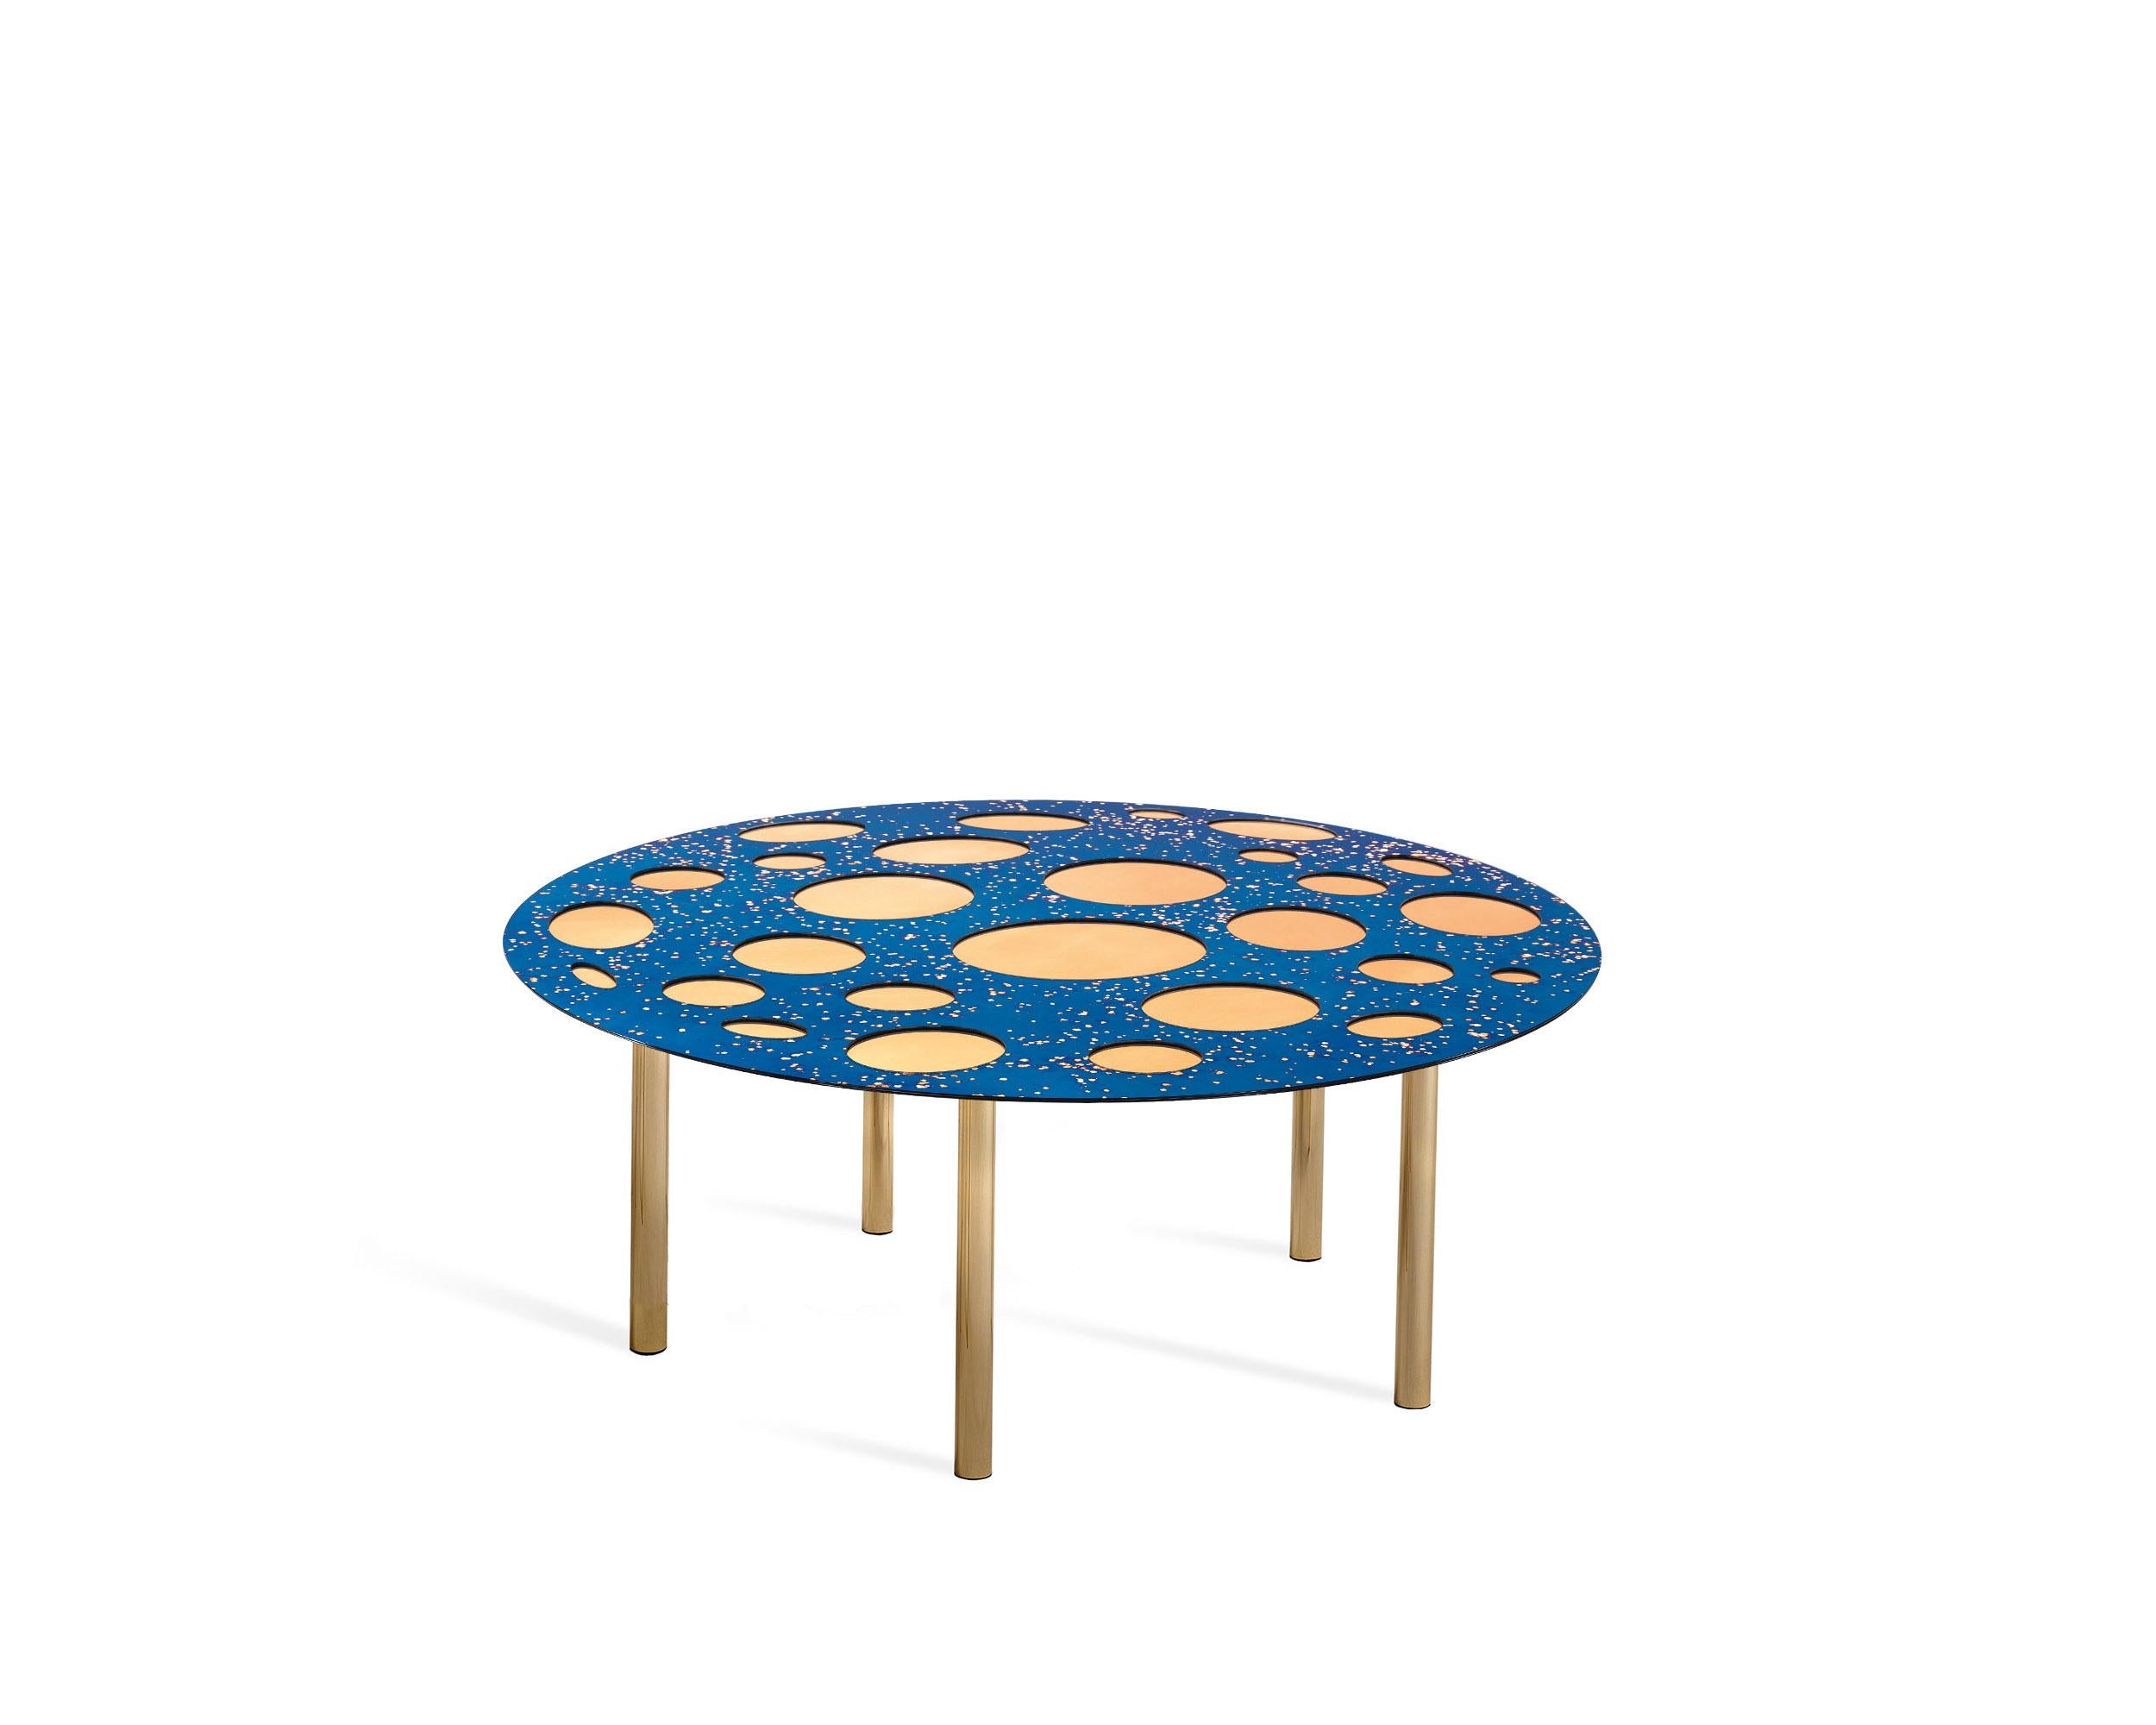 For Sale: Blue (Blue Star Dust) 21st Century Venny Small Table in Decorative Mirror Layers by Matteo Cibic